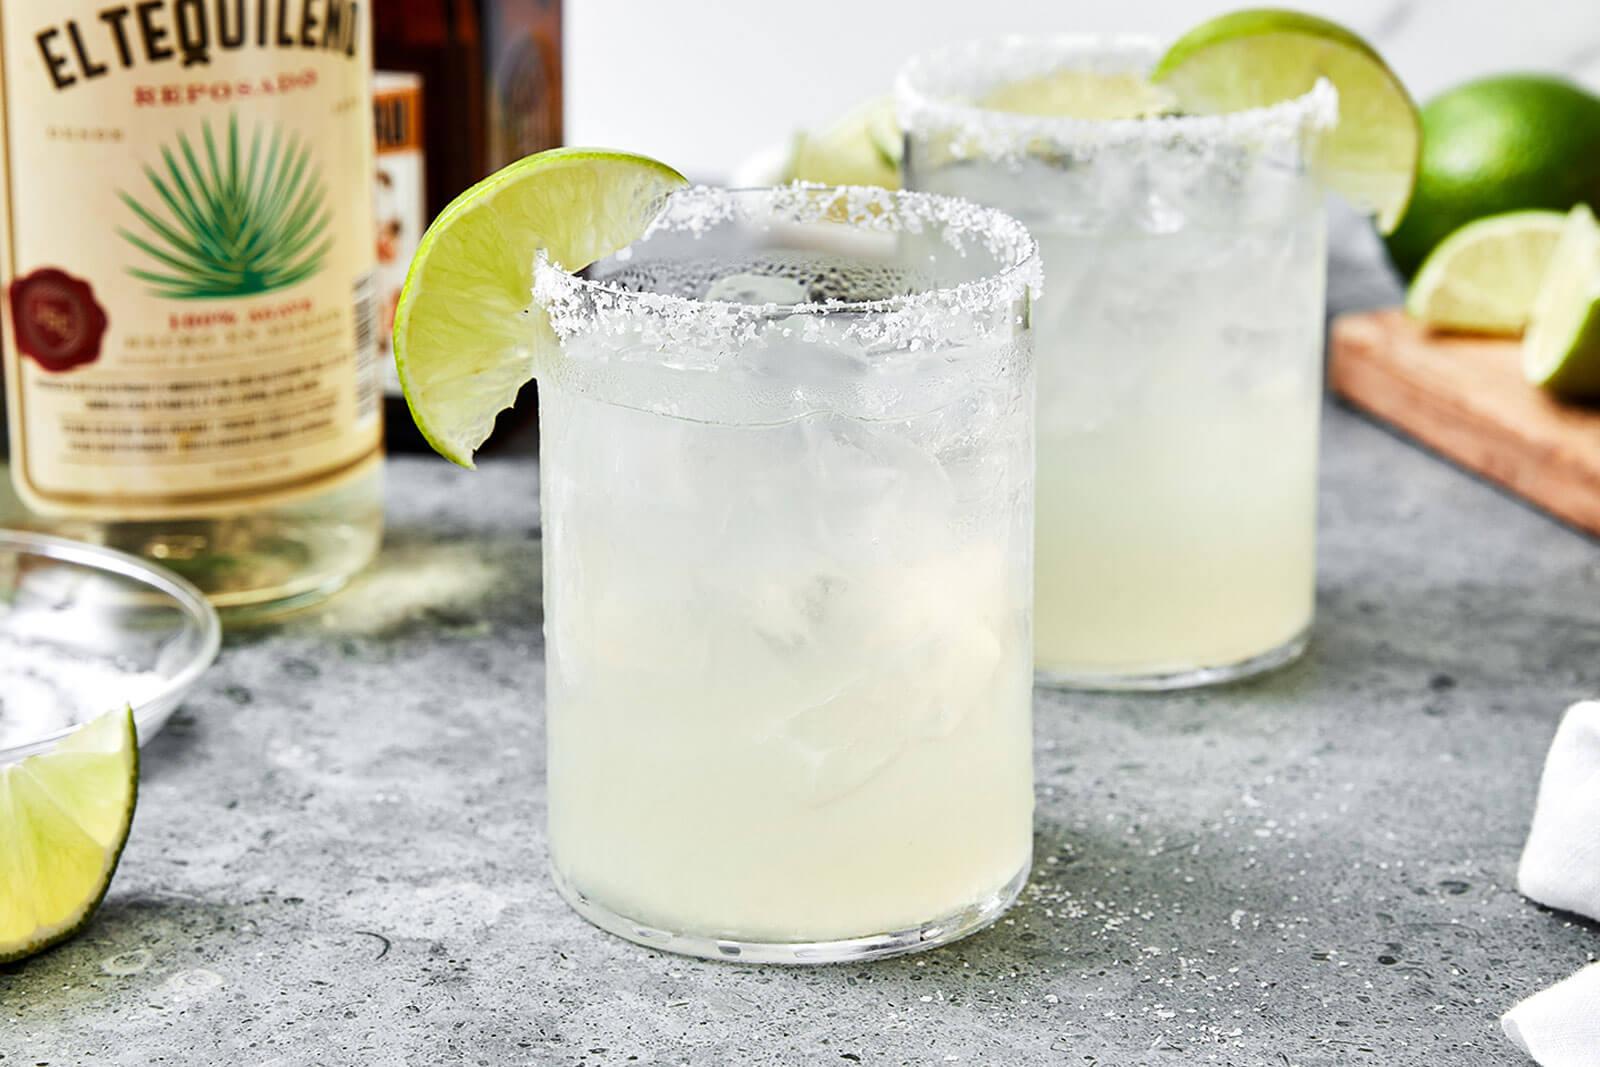 Classic Margarita Is a Simple and Delicious Cocktail. - Conclusion